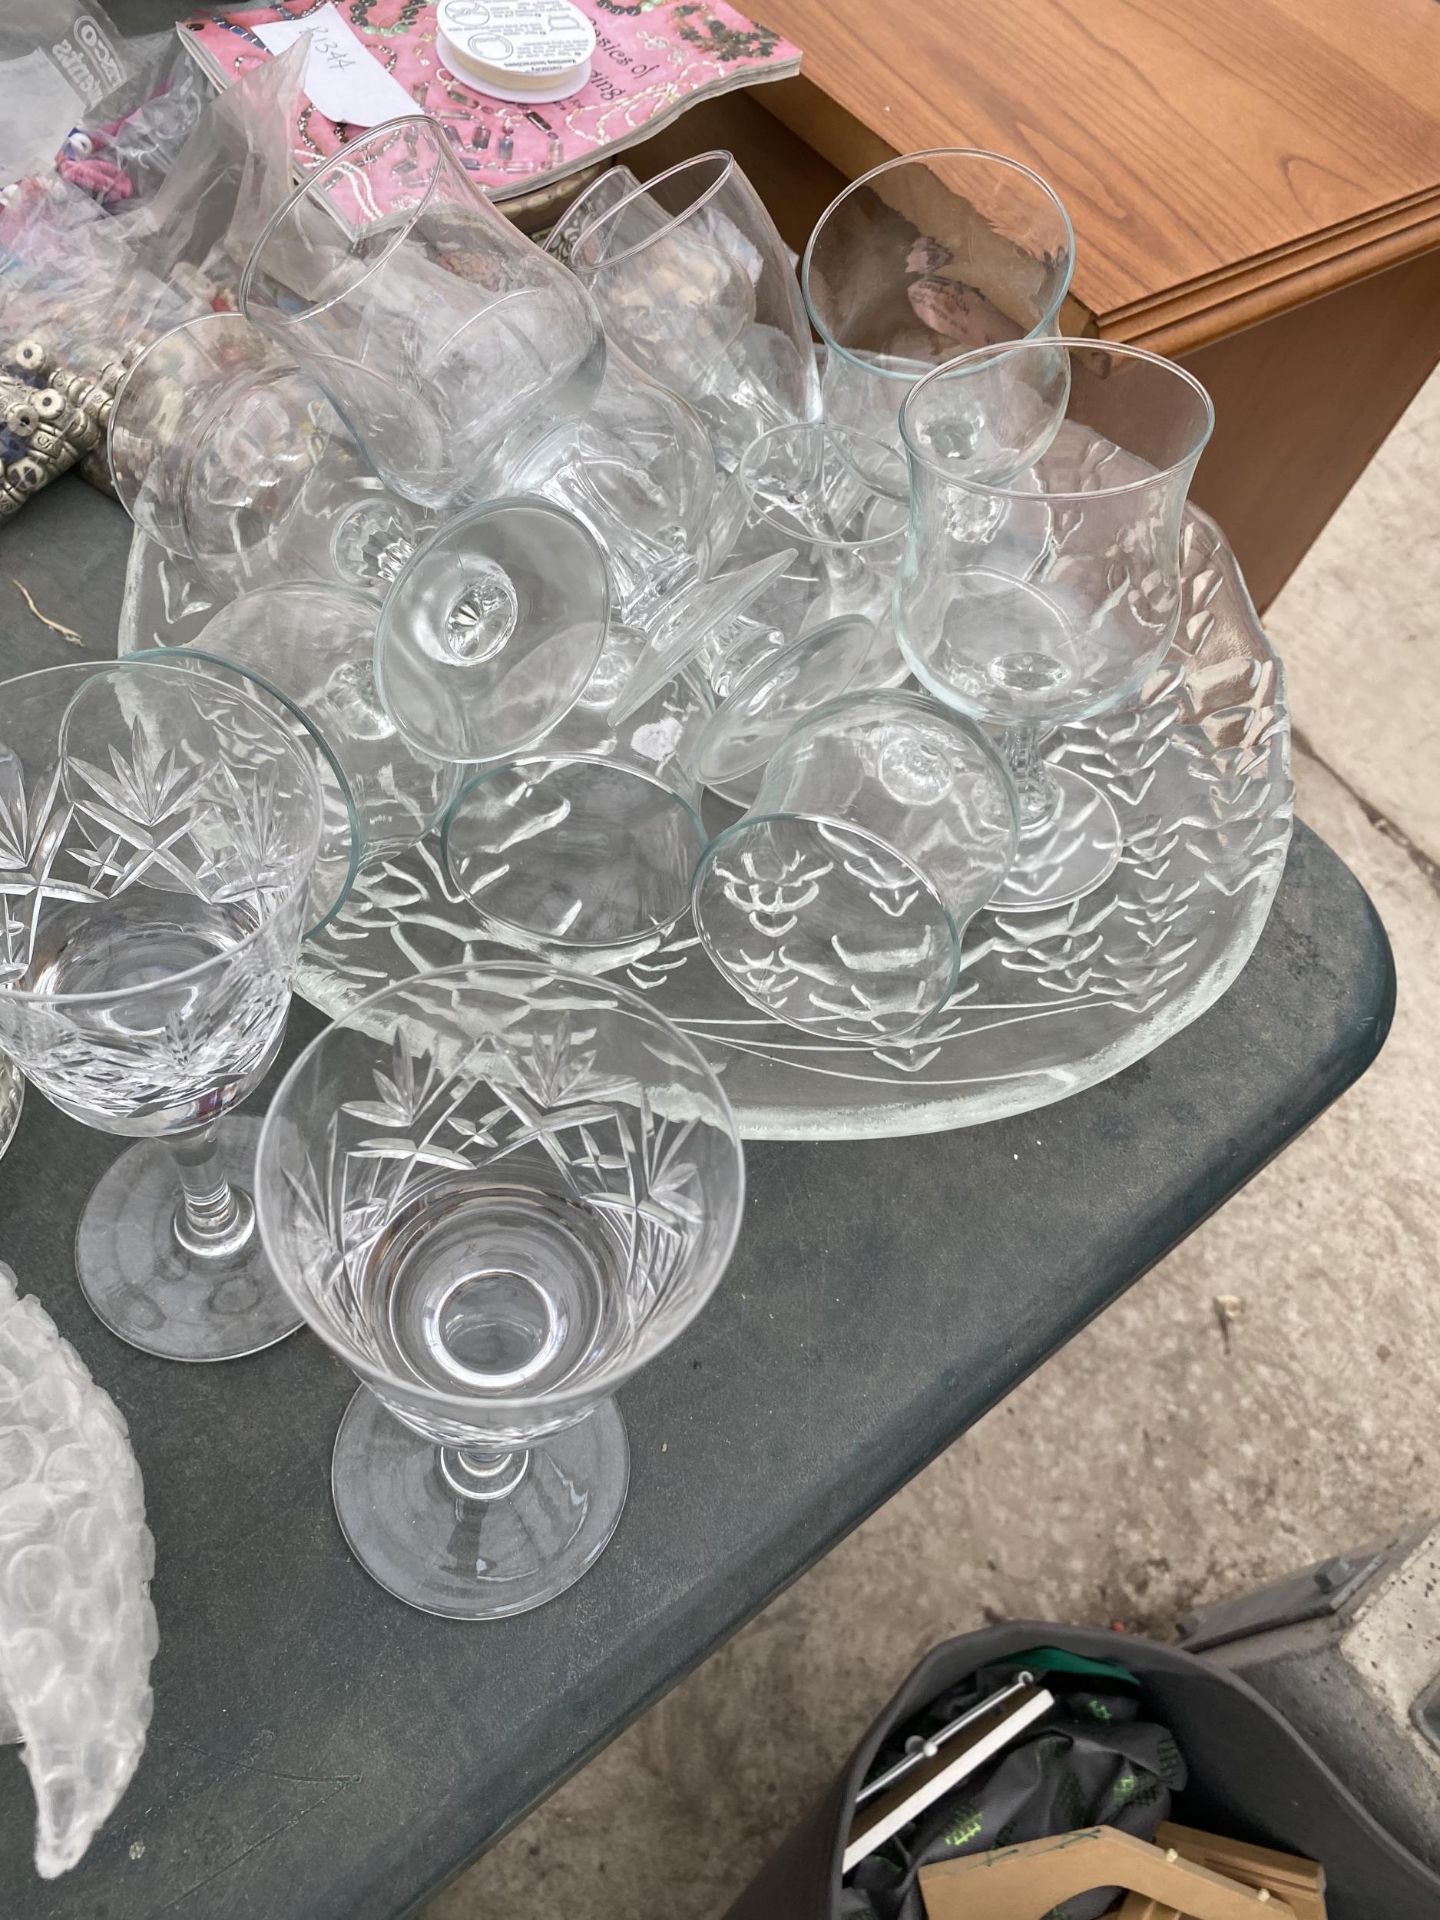 A LARGE QUANTITY OF GLASS WARE TO INCLUDE A BOWL AND WINE GLASSES - Image 2 of 3